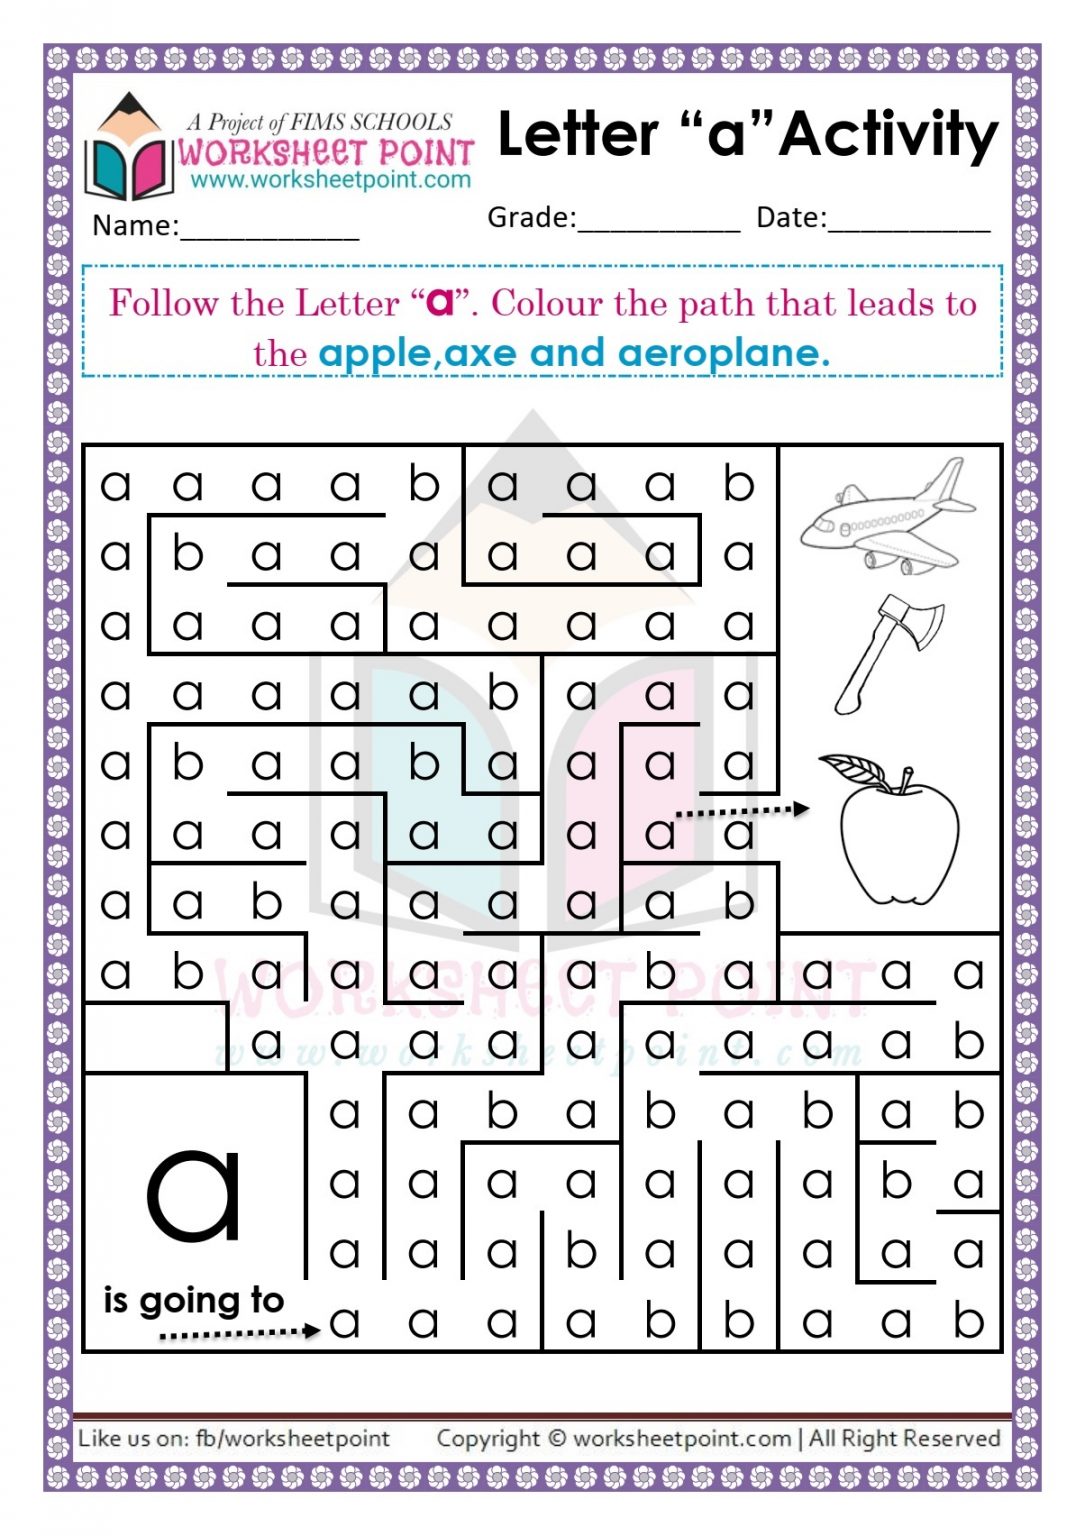 follow the letter a to find path - Worksheet Point